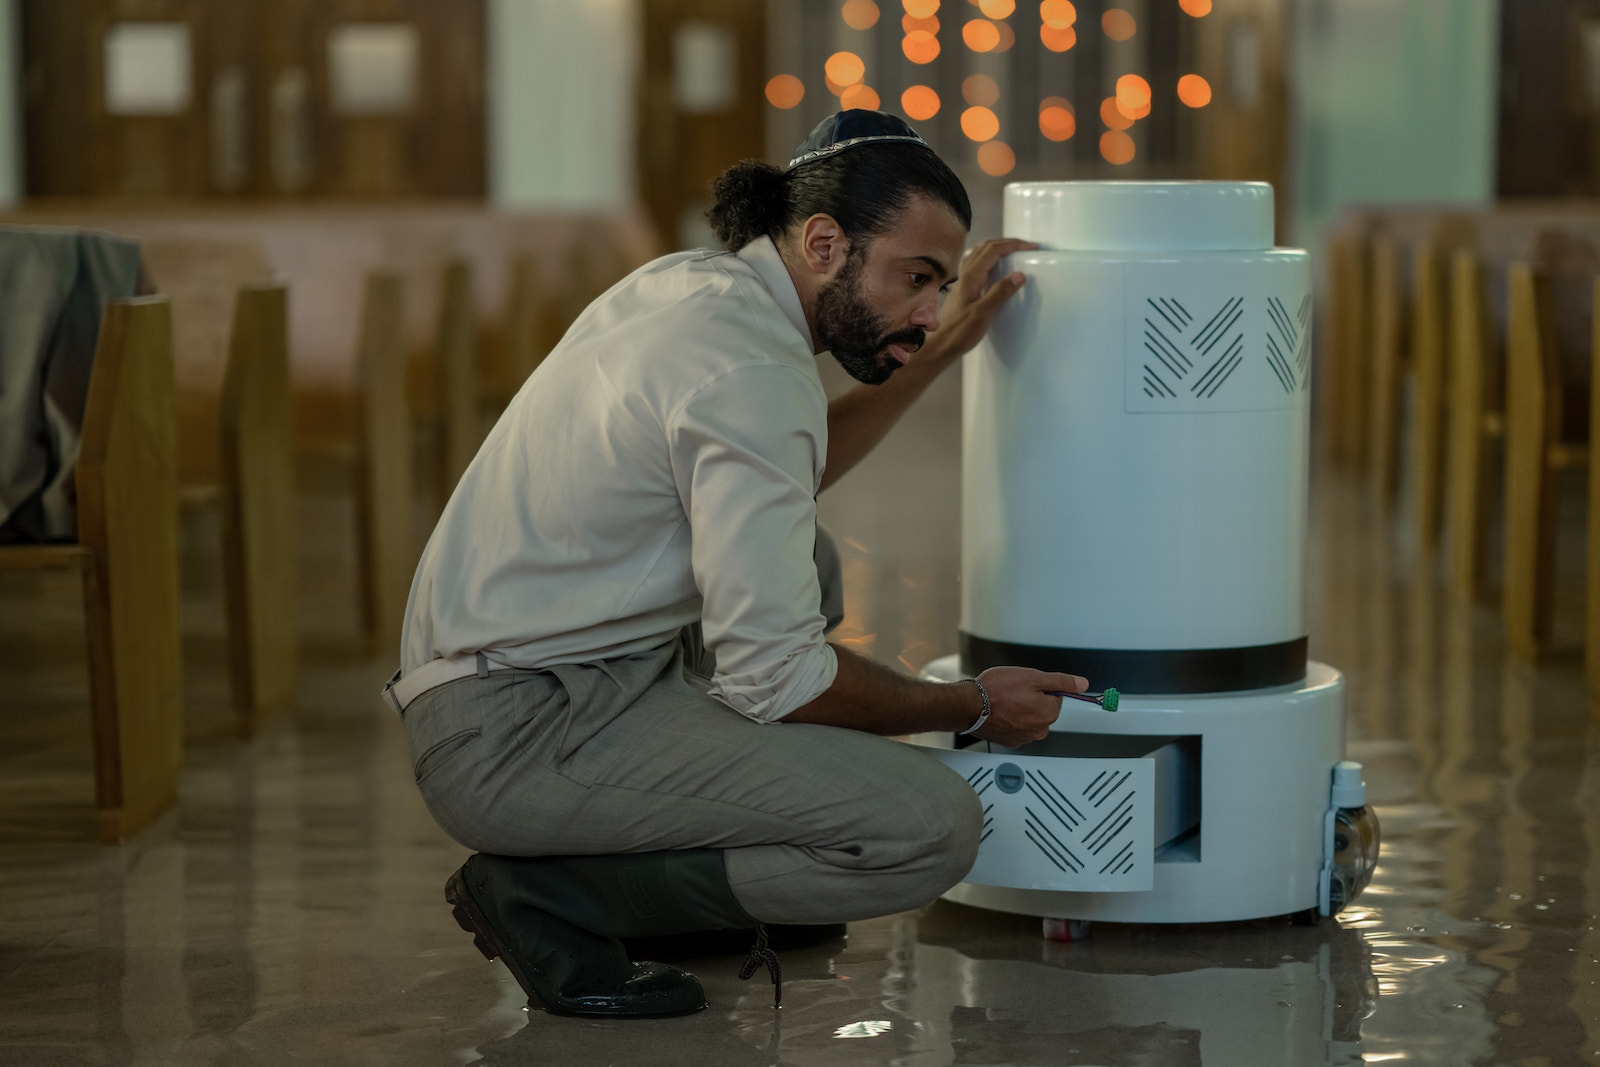 a man in a white shirt and khakis kneels near a robot